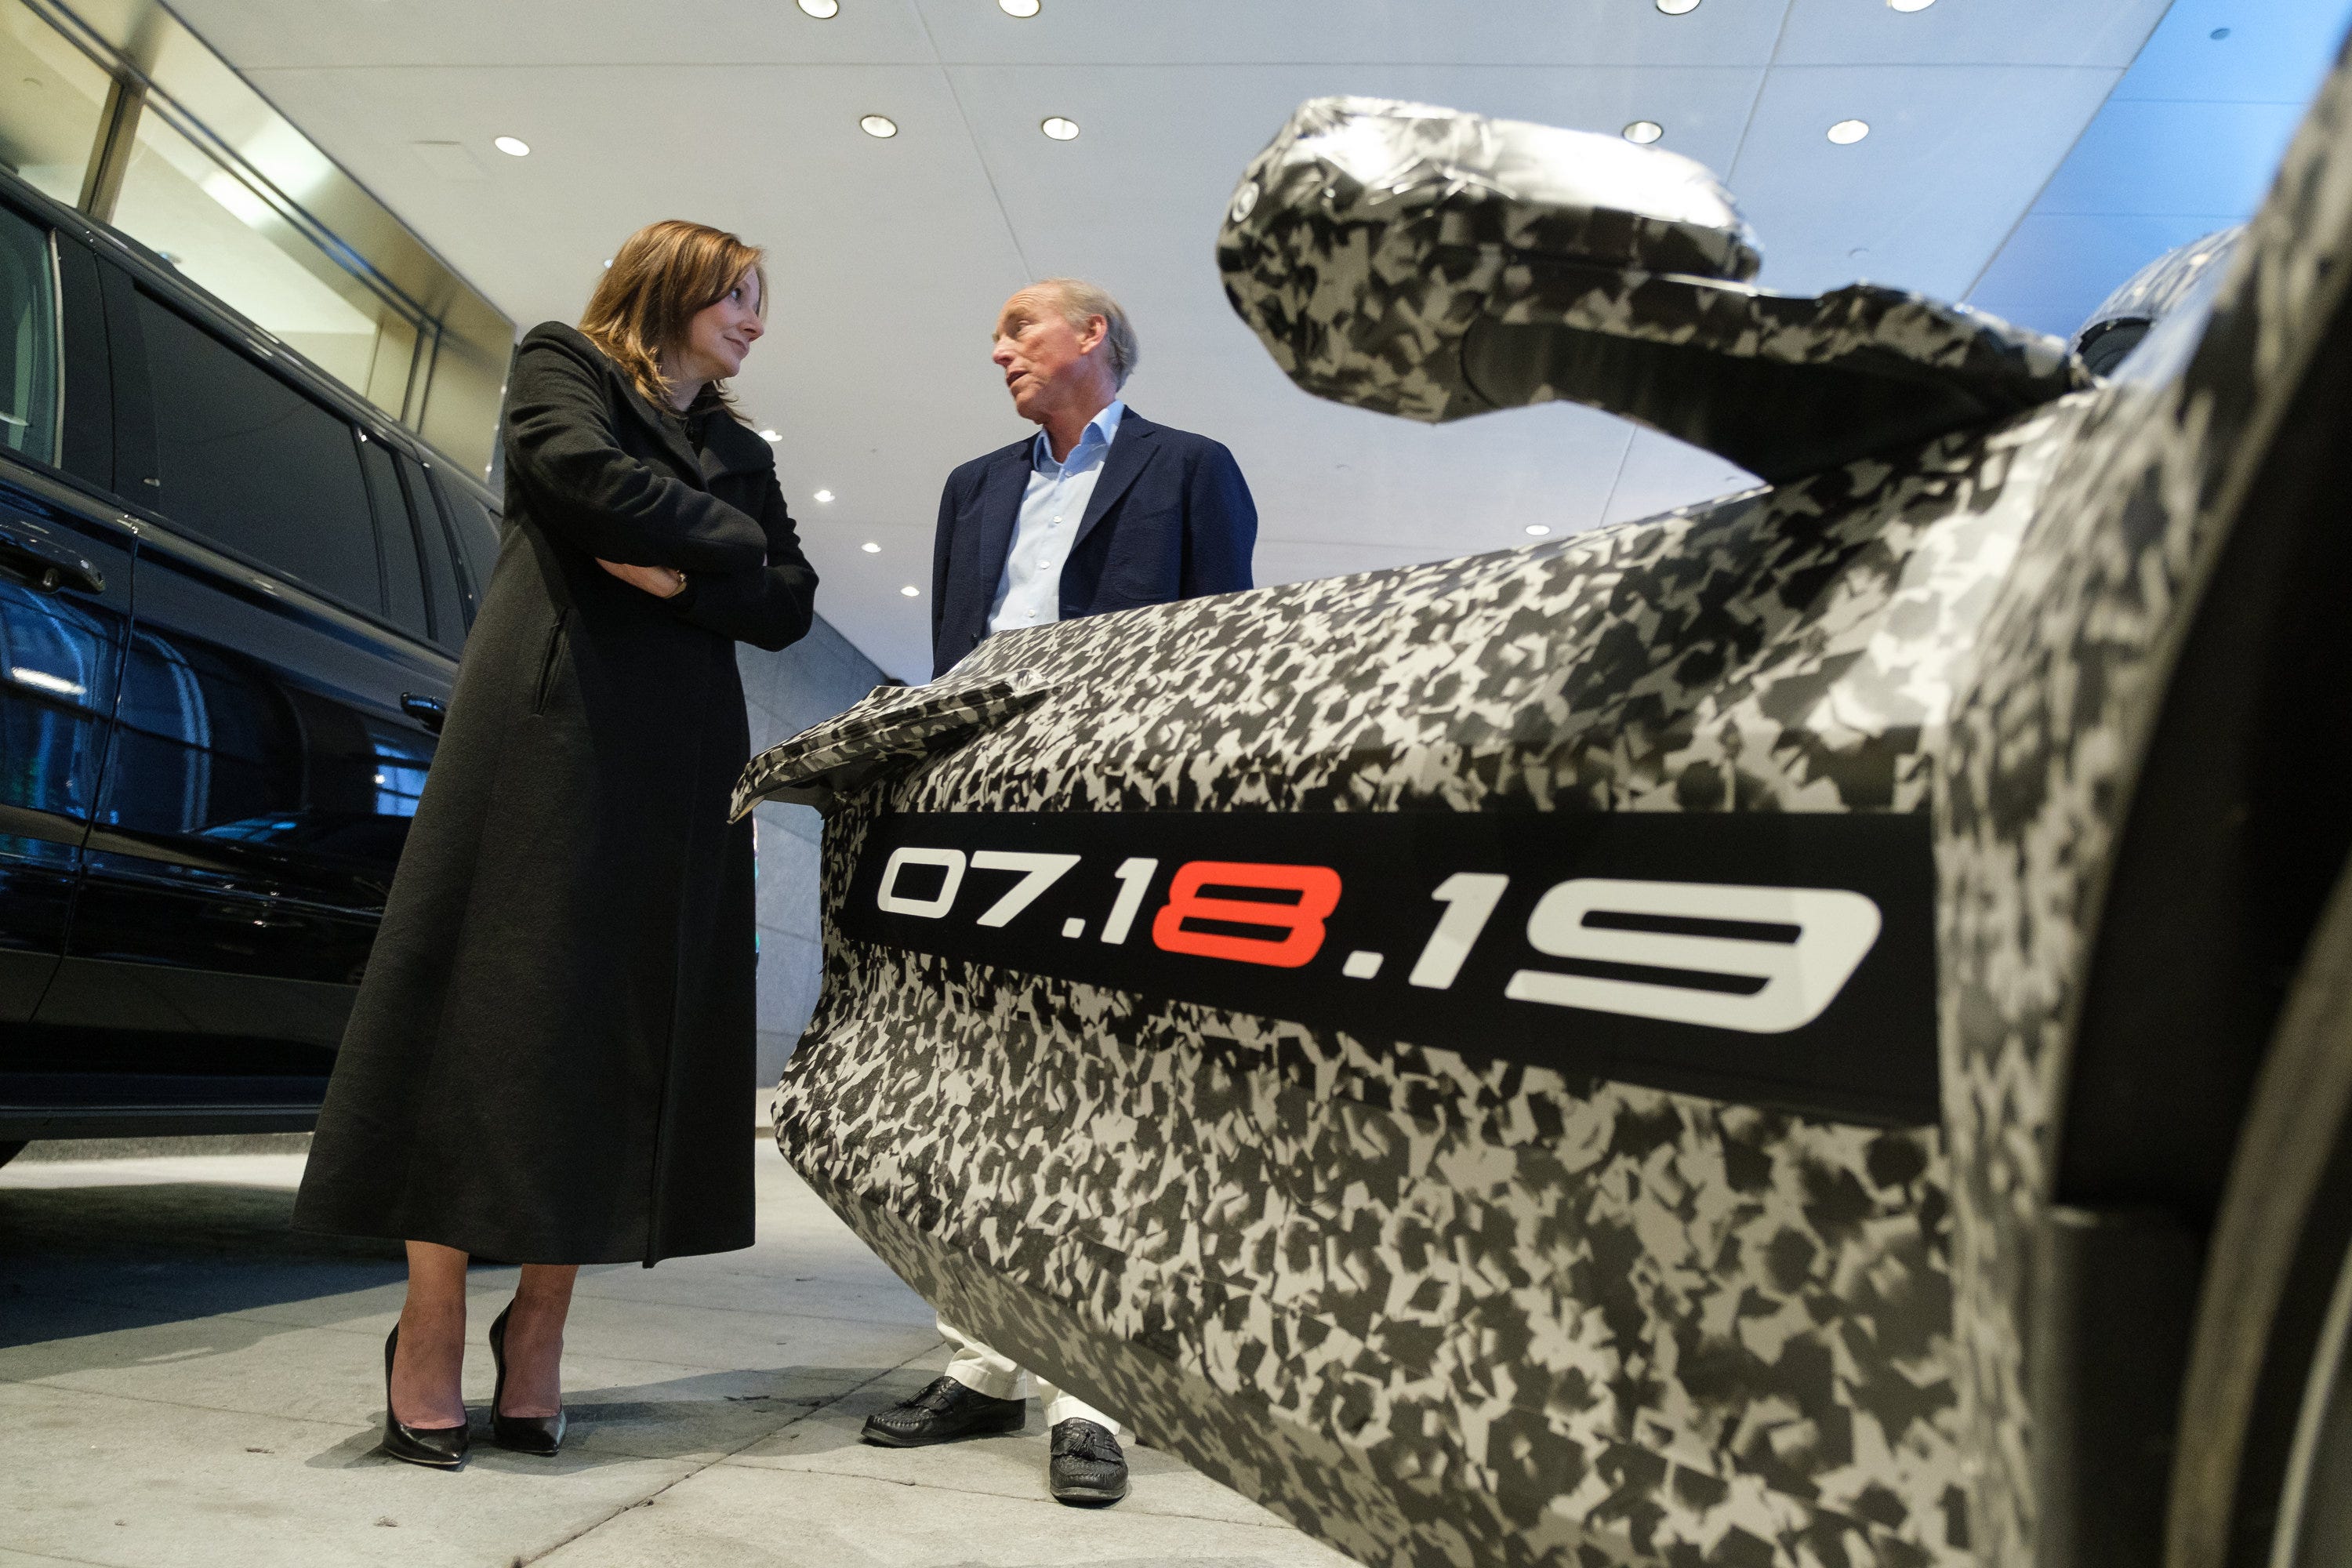 General Motors Chairman and CEO Mary Barra and Chevrolet Corvette Chief Engineer Tadge Juechter Thursday, April 11, 2019 with a camouflaged next generation Chevrolet Corvette in New York City.